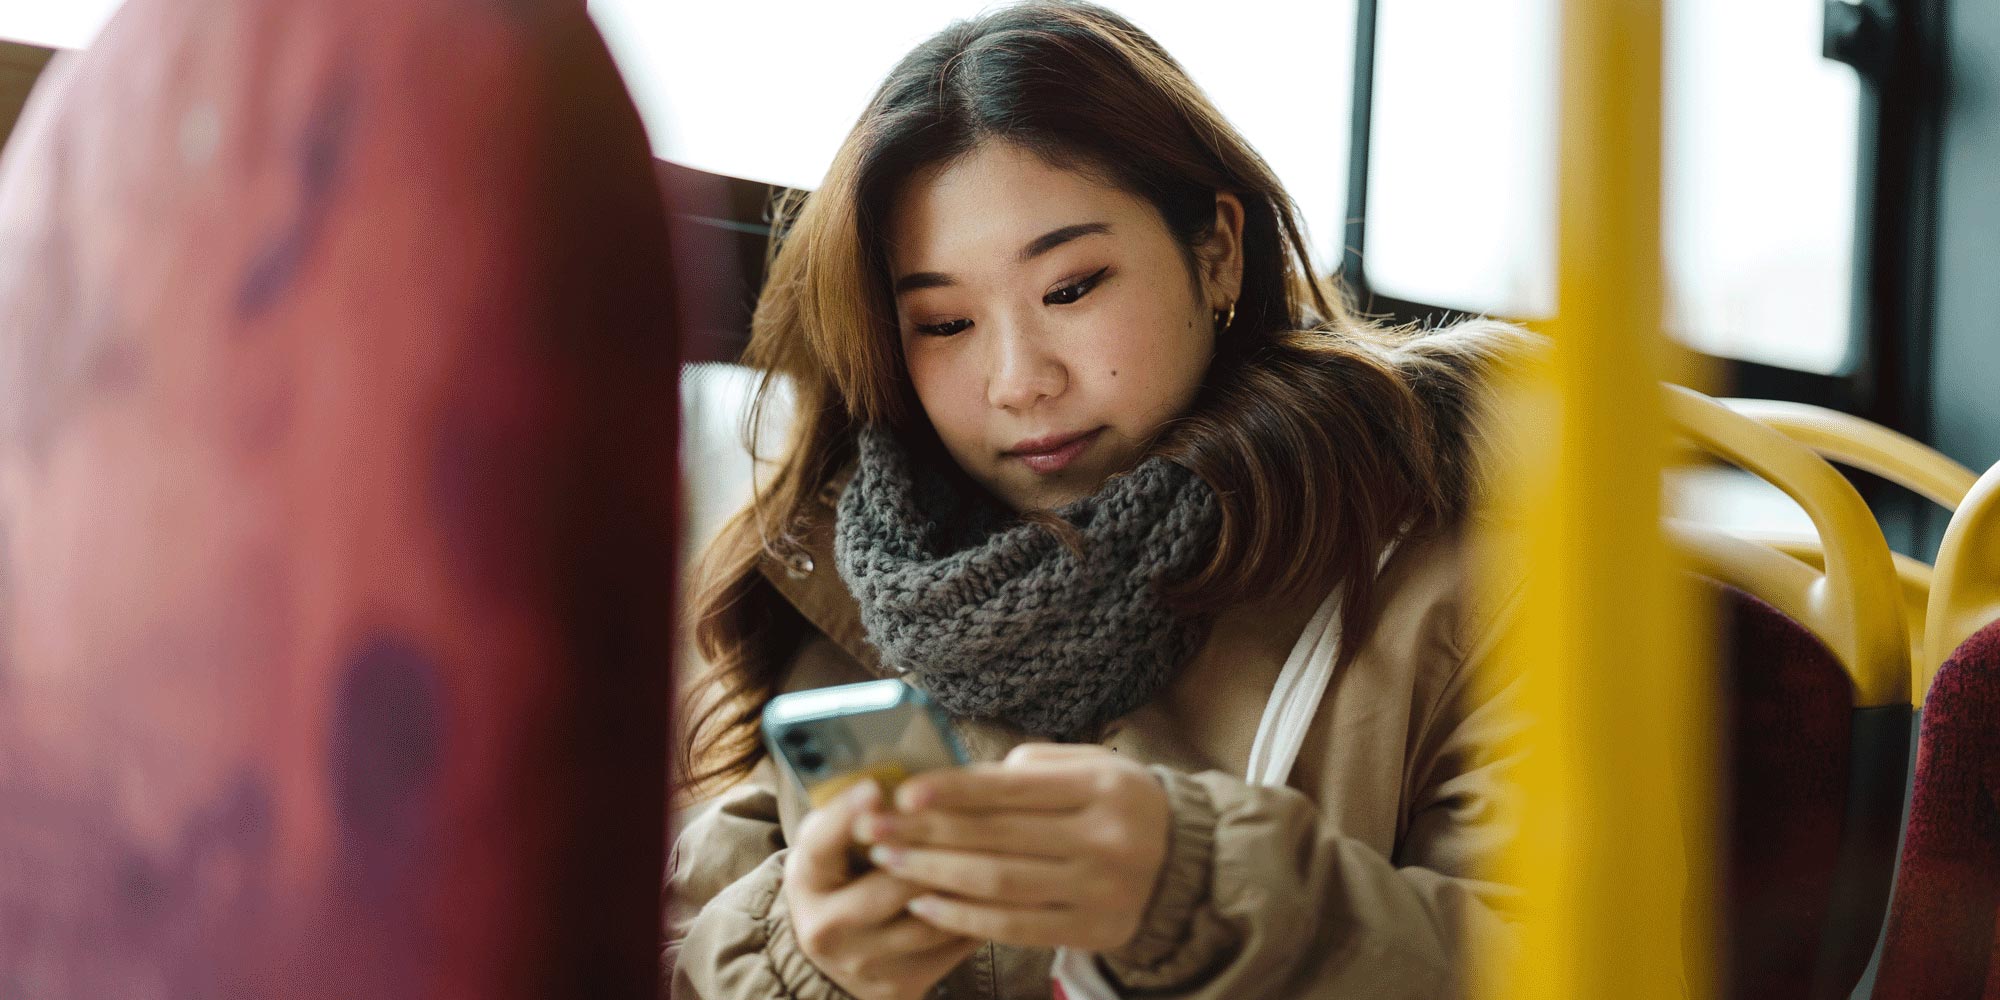 Asian woman riding a bus looking at her phone.